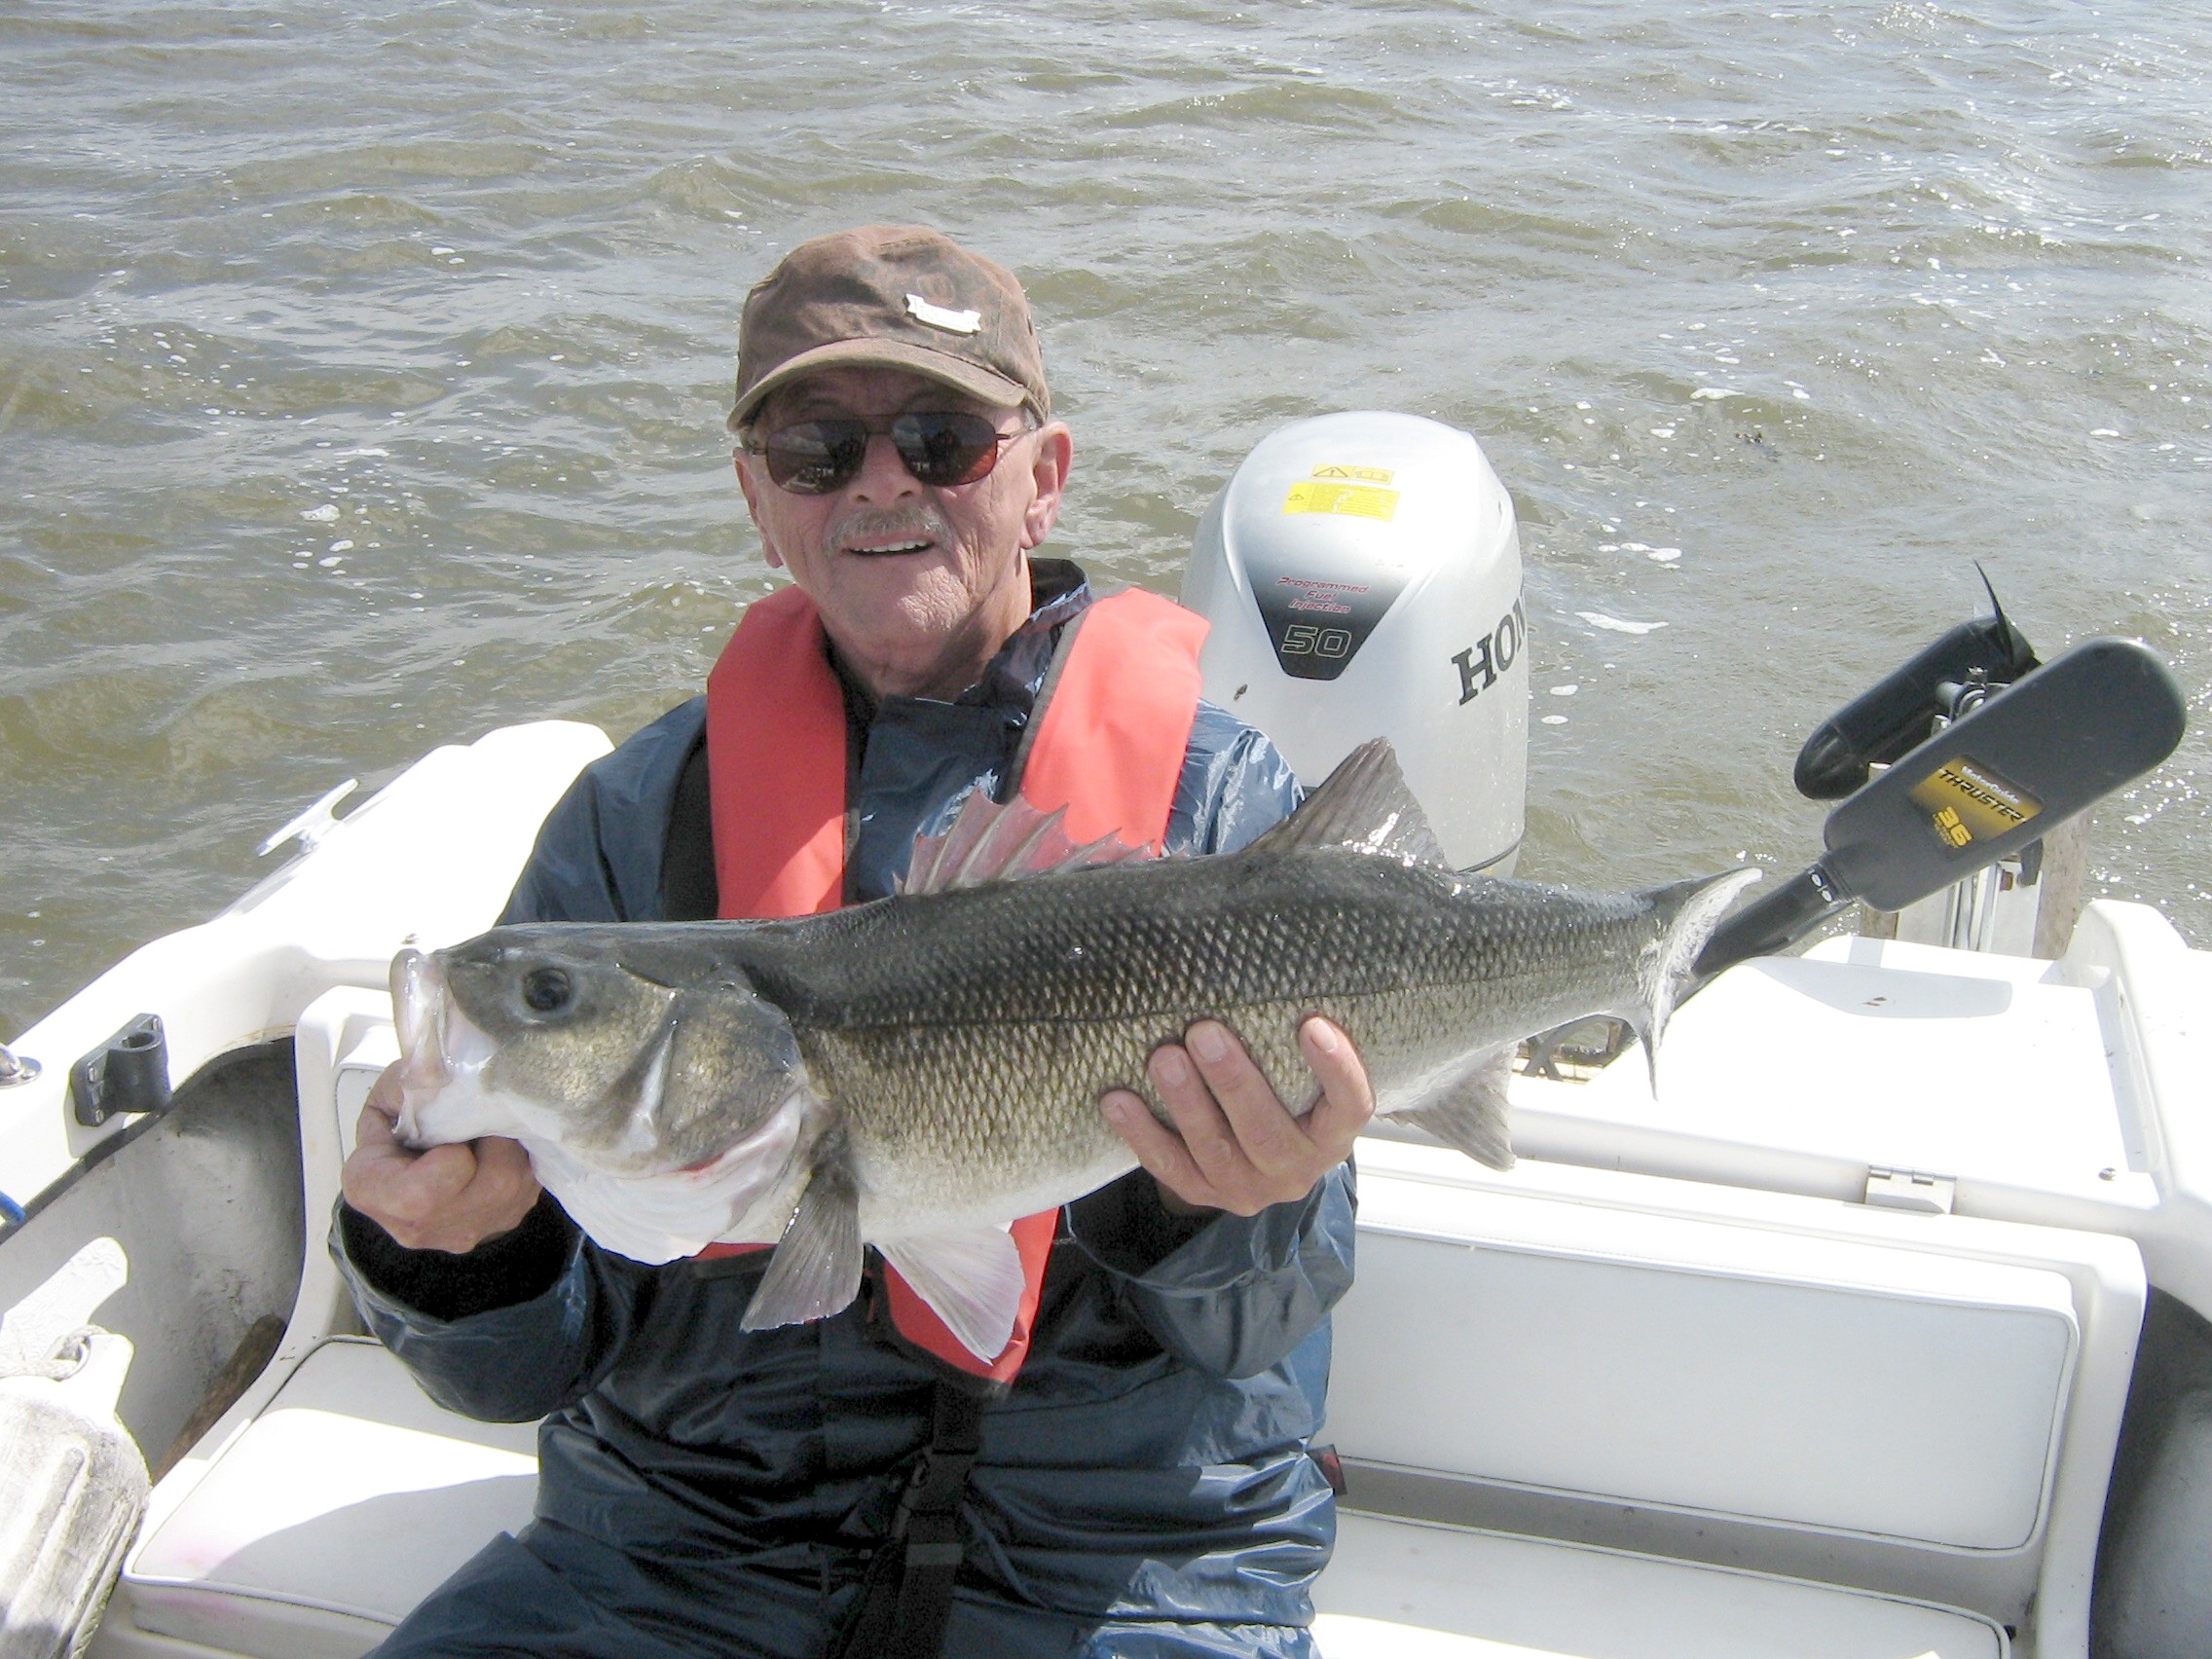 This fine bass weighed 10.3 lbs on Richie’s new Ruben Heaton scales.